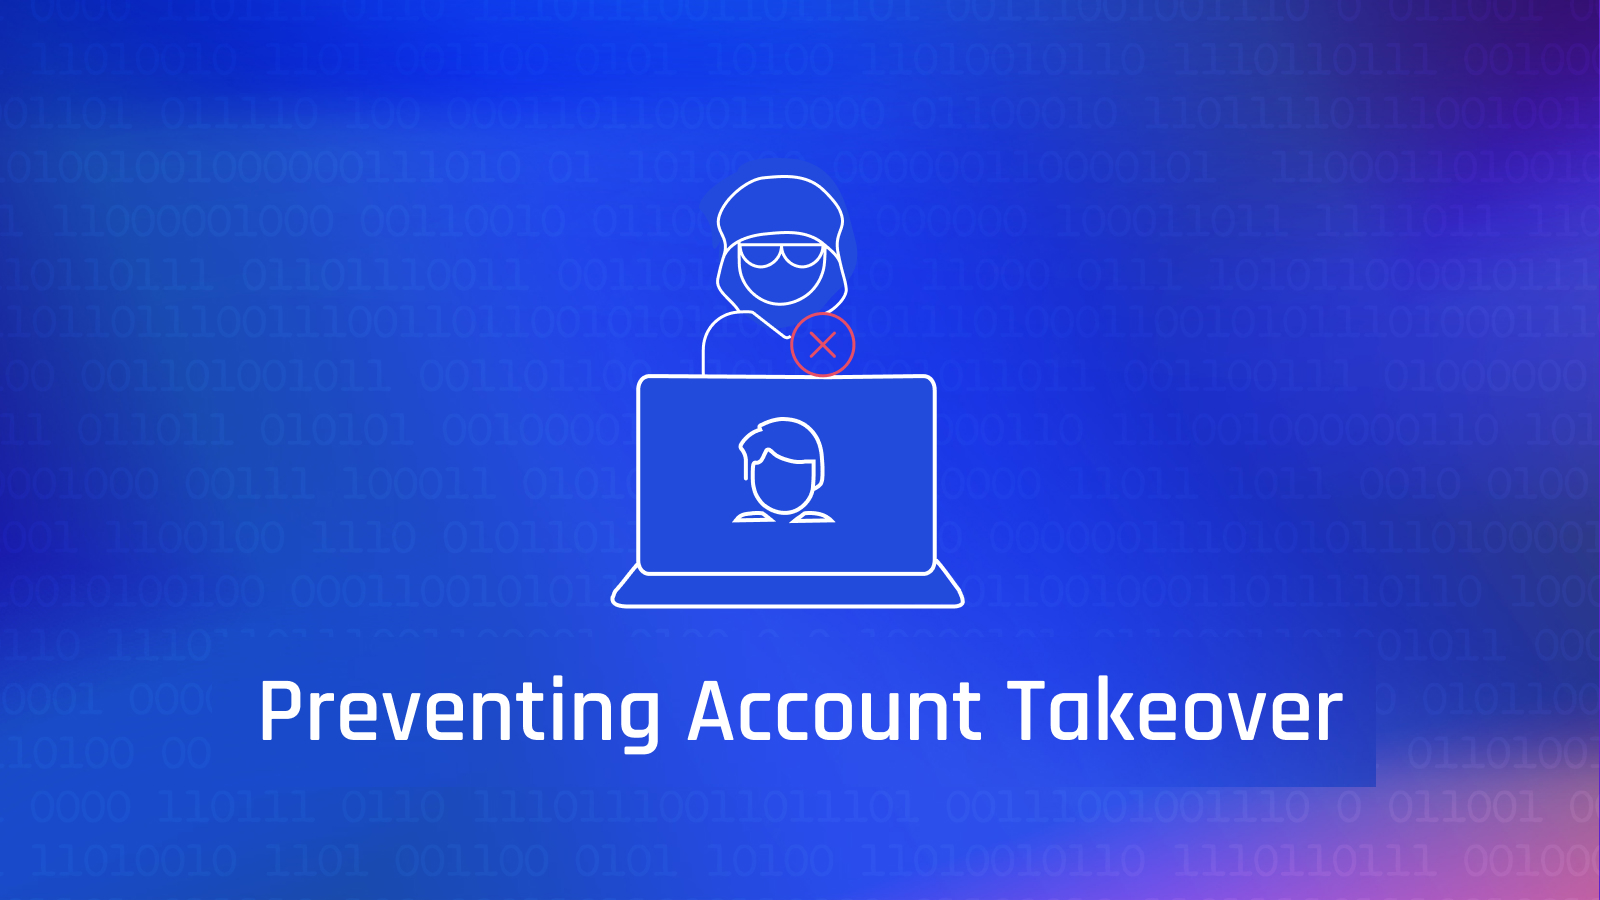 How to Prevent Account Takeover